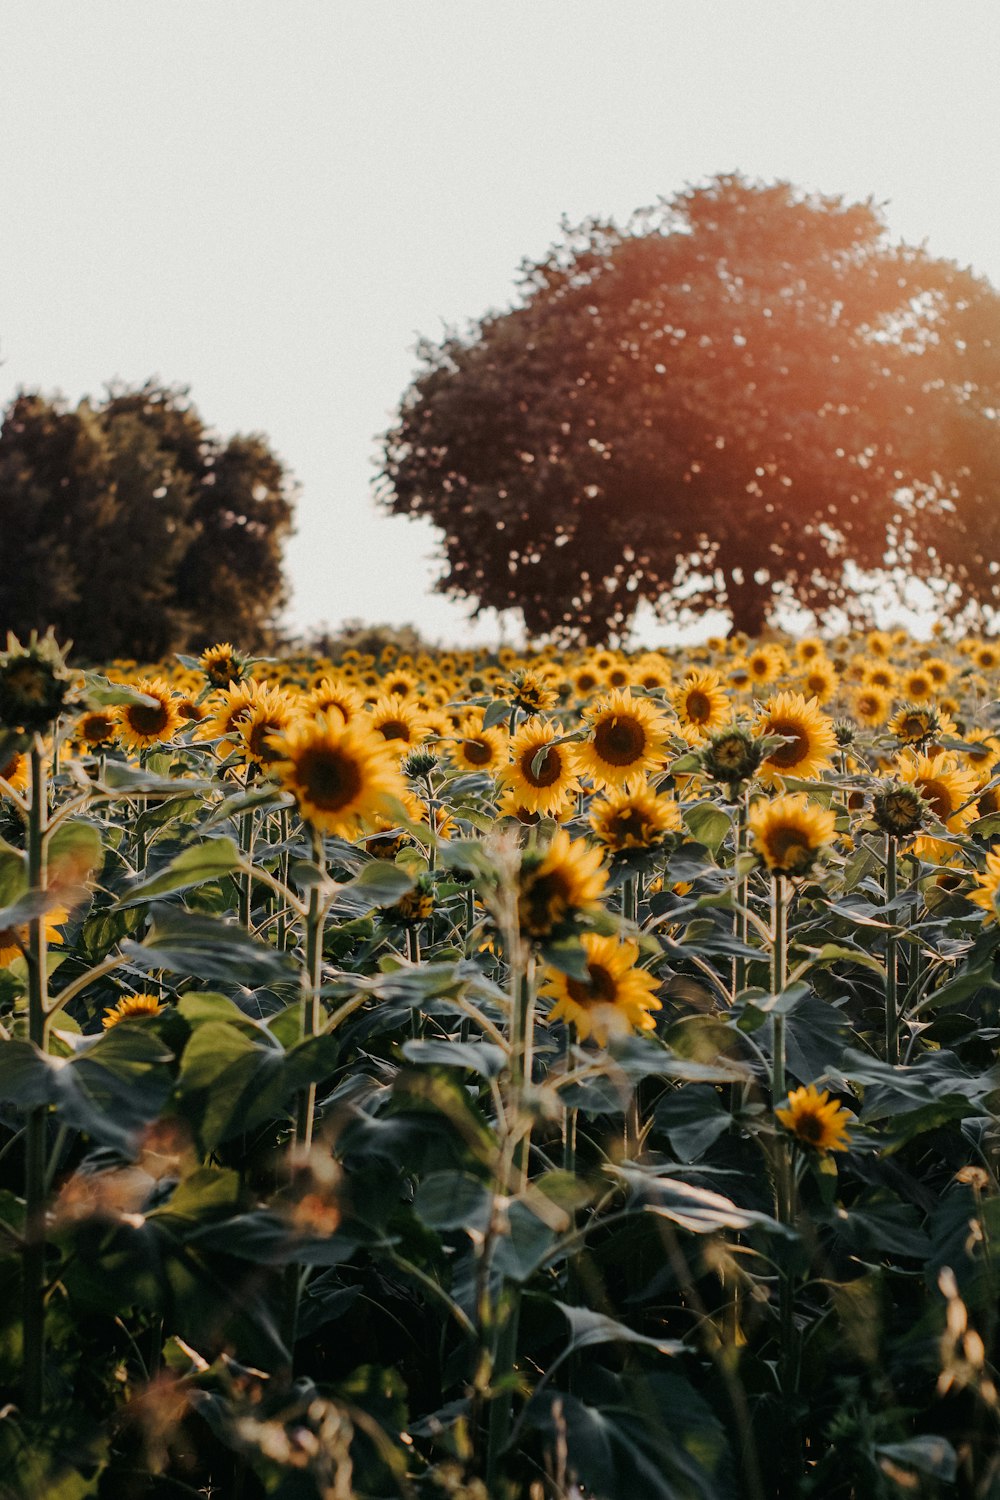 a large field of sunflowers with trees in the background